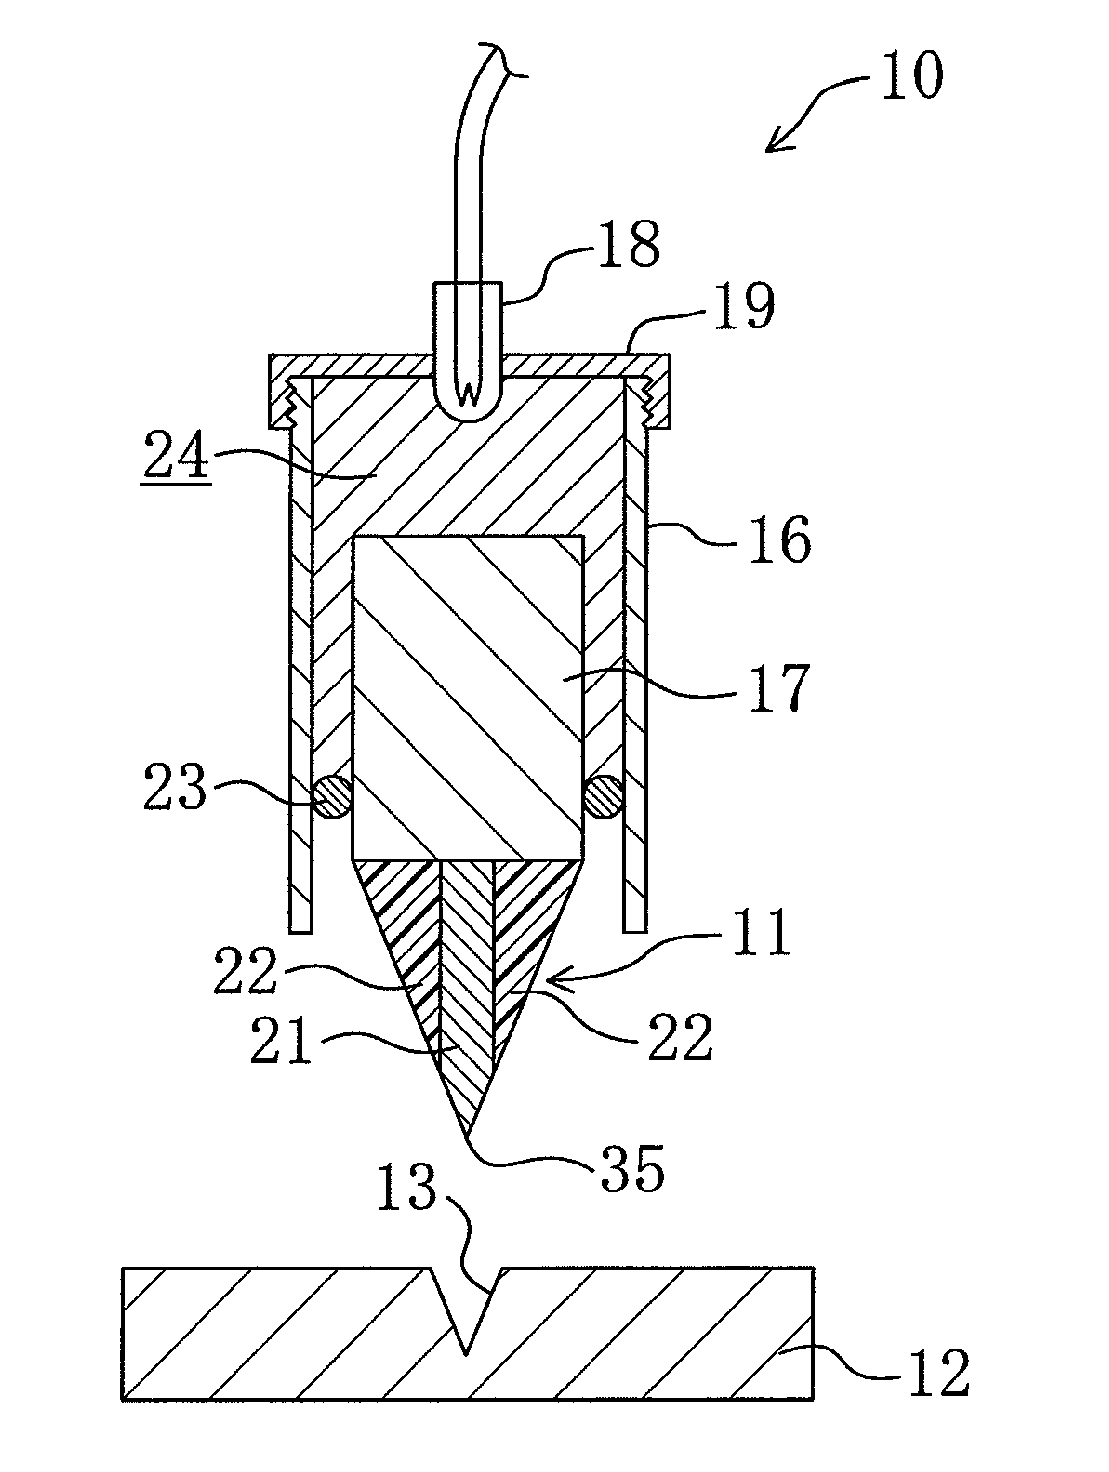 Cutting apparatus, breaker, contactor, and electrical circuit breaker